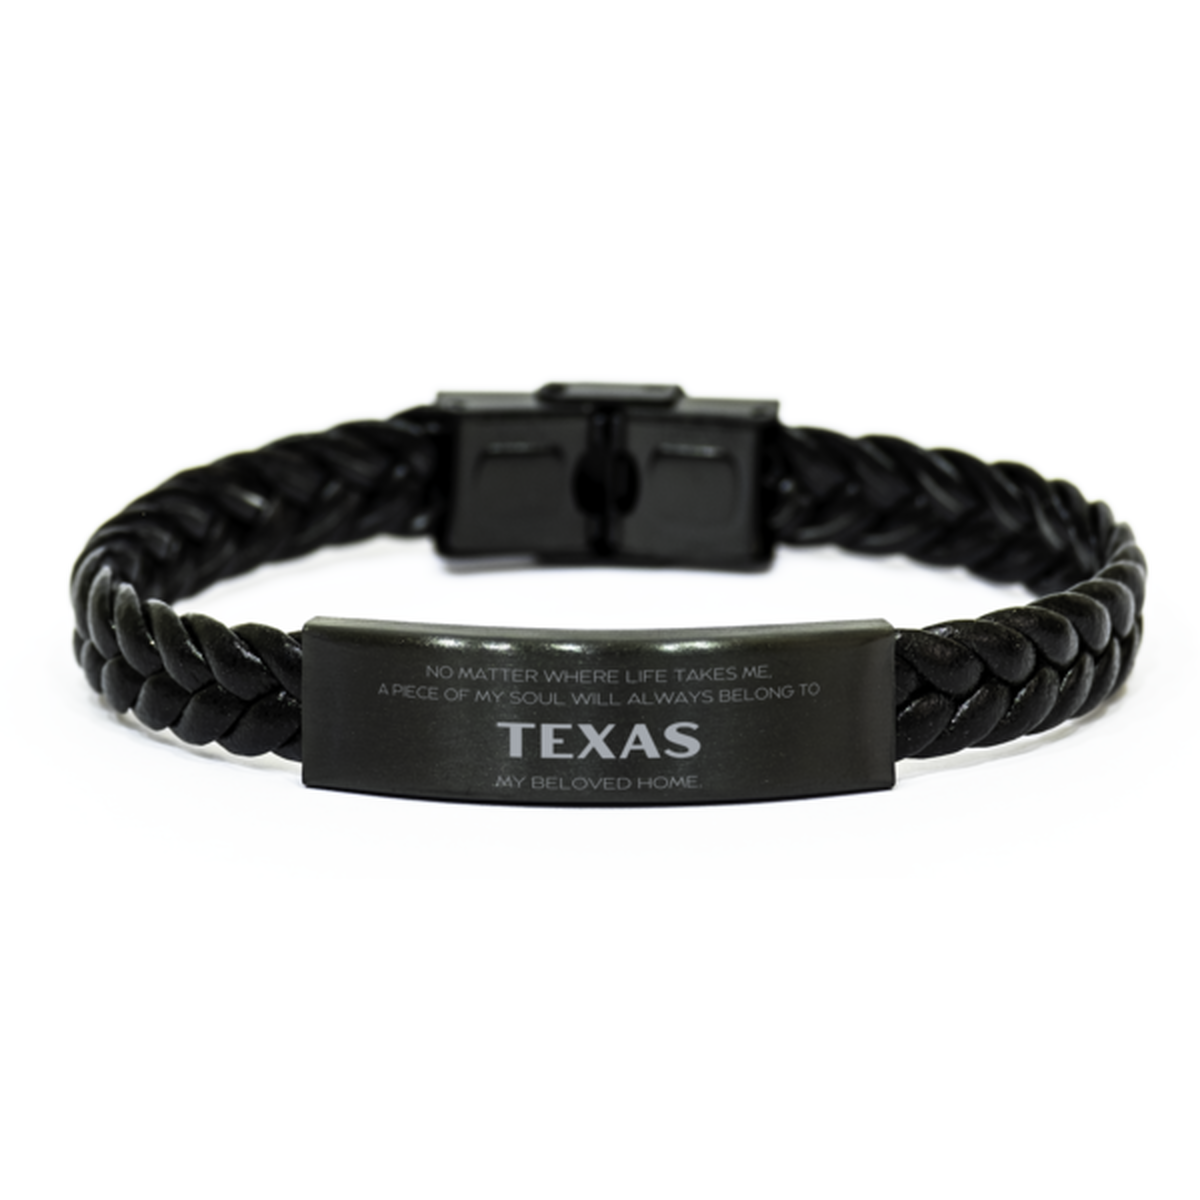 Love Texas State Gifts, My soul will always belong to Texas, Proud Braided Leather Bracelet, Birthday Unique Gifts For Texas Men, Women, Friends